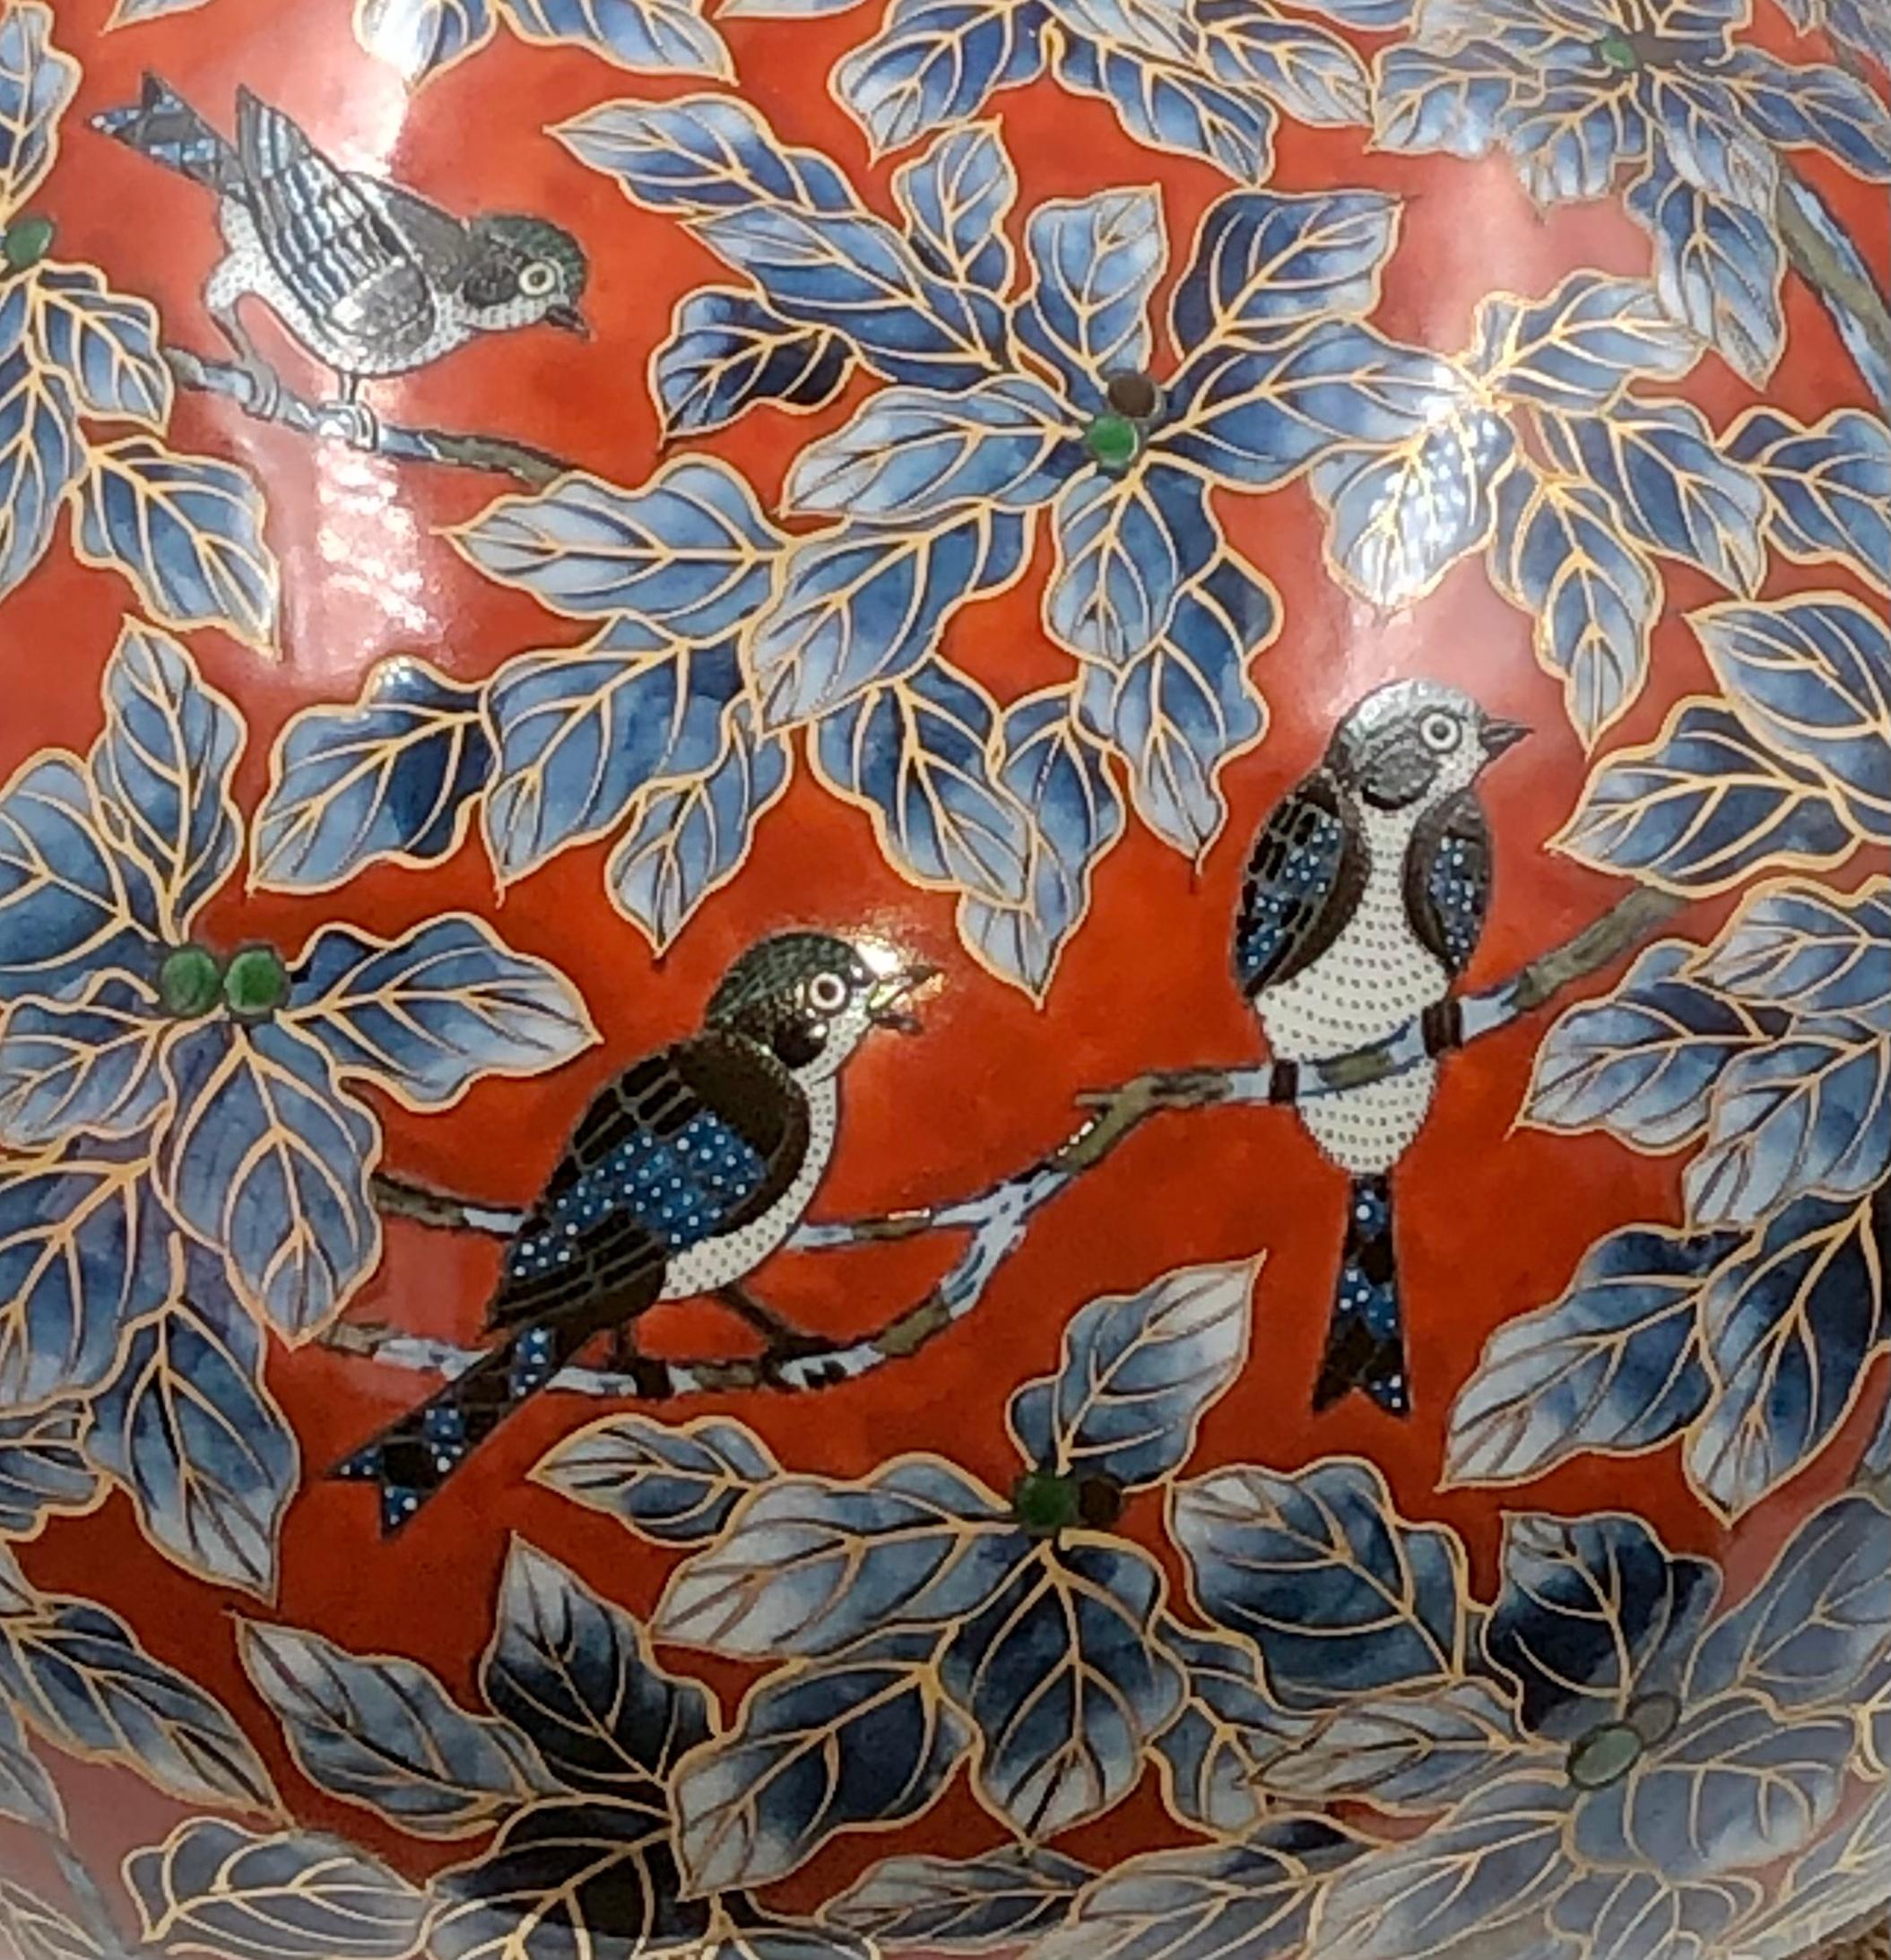 Exceptional Japanese contemporary museum quality decorative porcelain vase, painstakingly intricately gilded and hand painted in stunning blue and red on a beautiful globular body, a signed masterpiece by second-generation master porcelain artist of